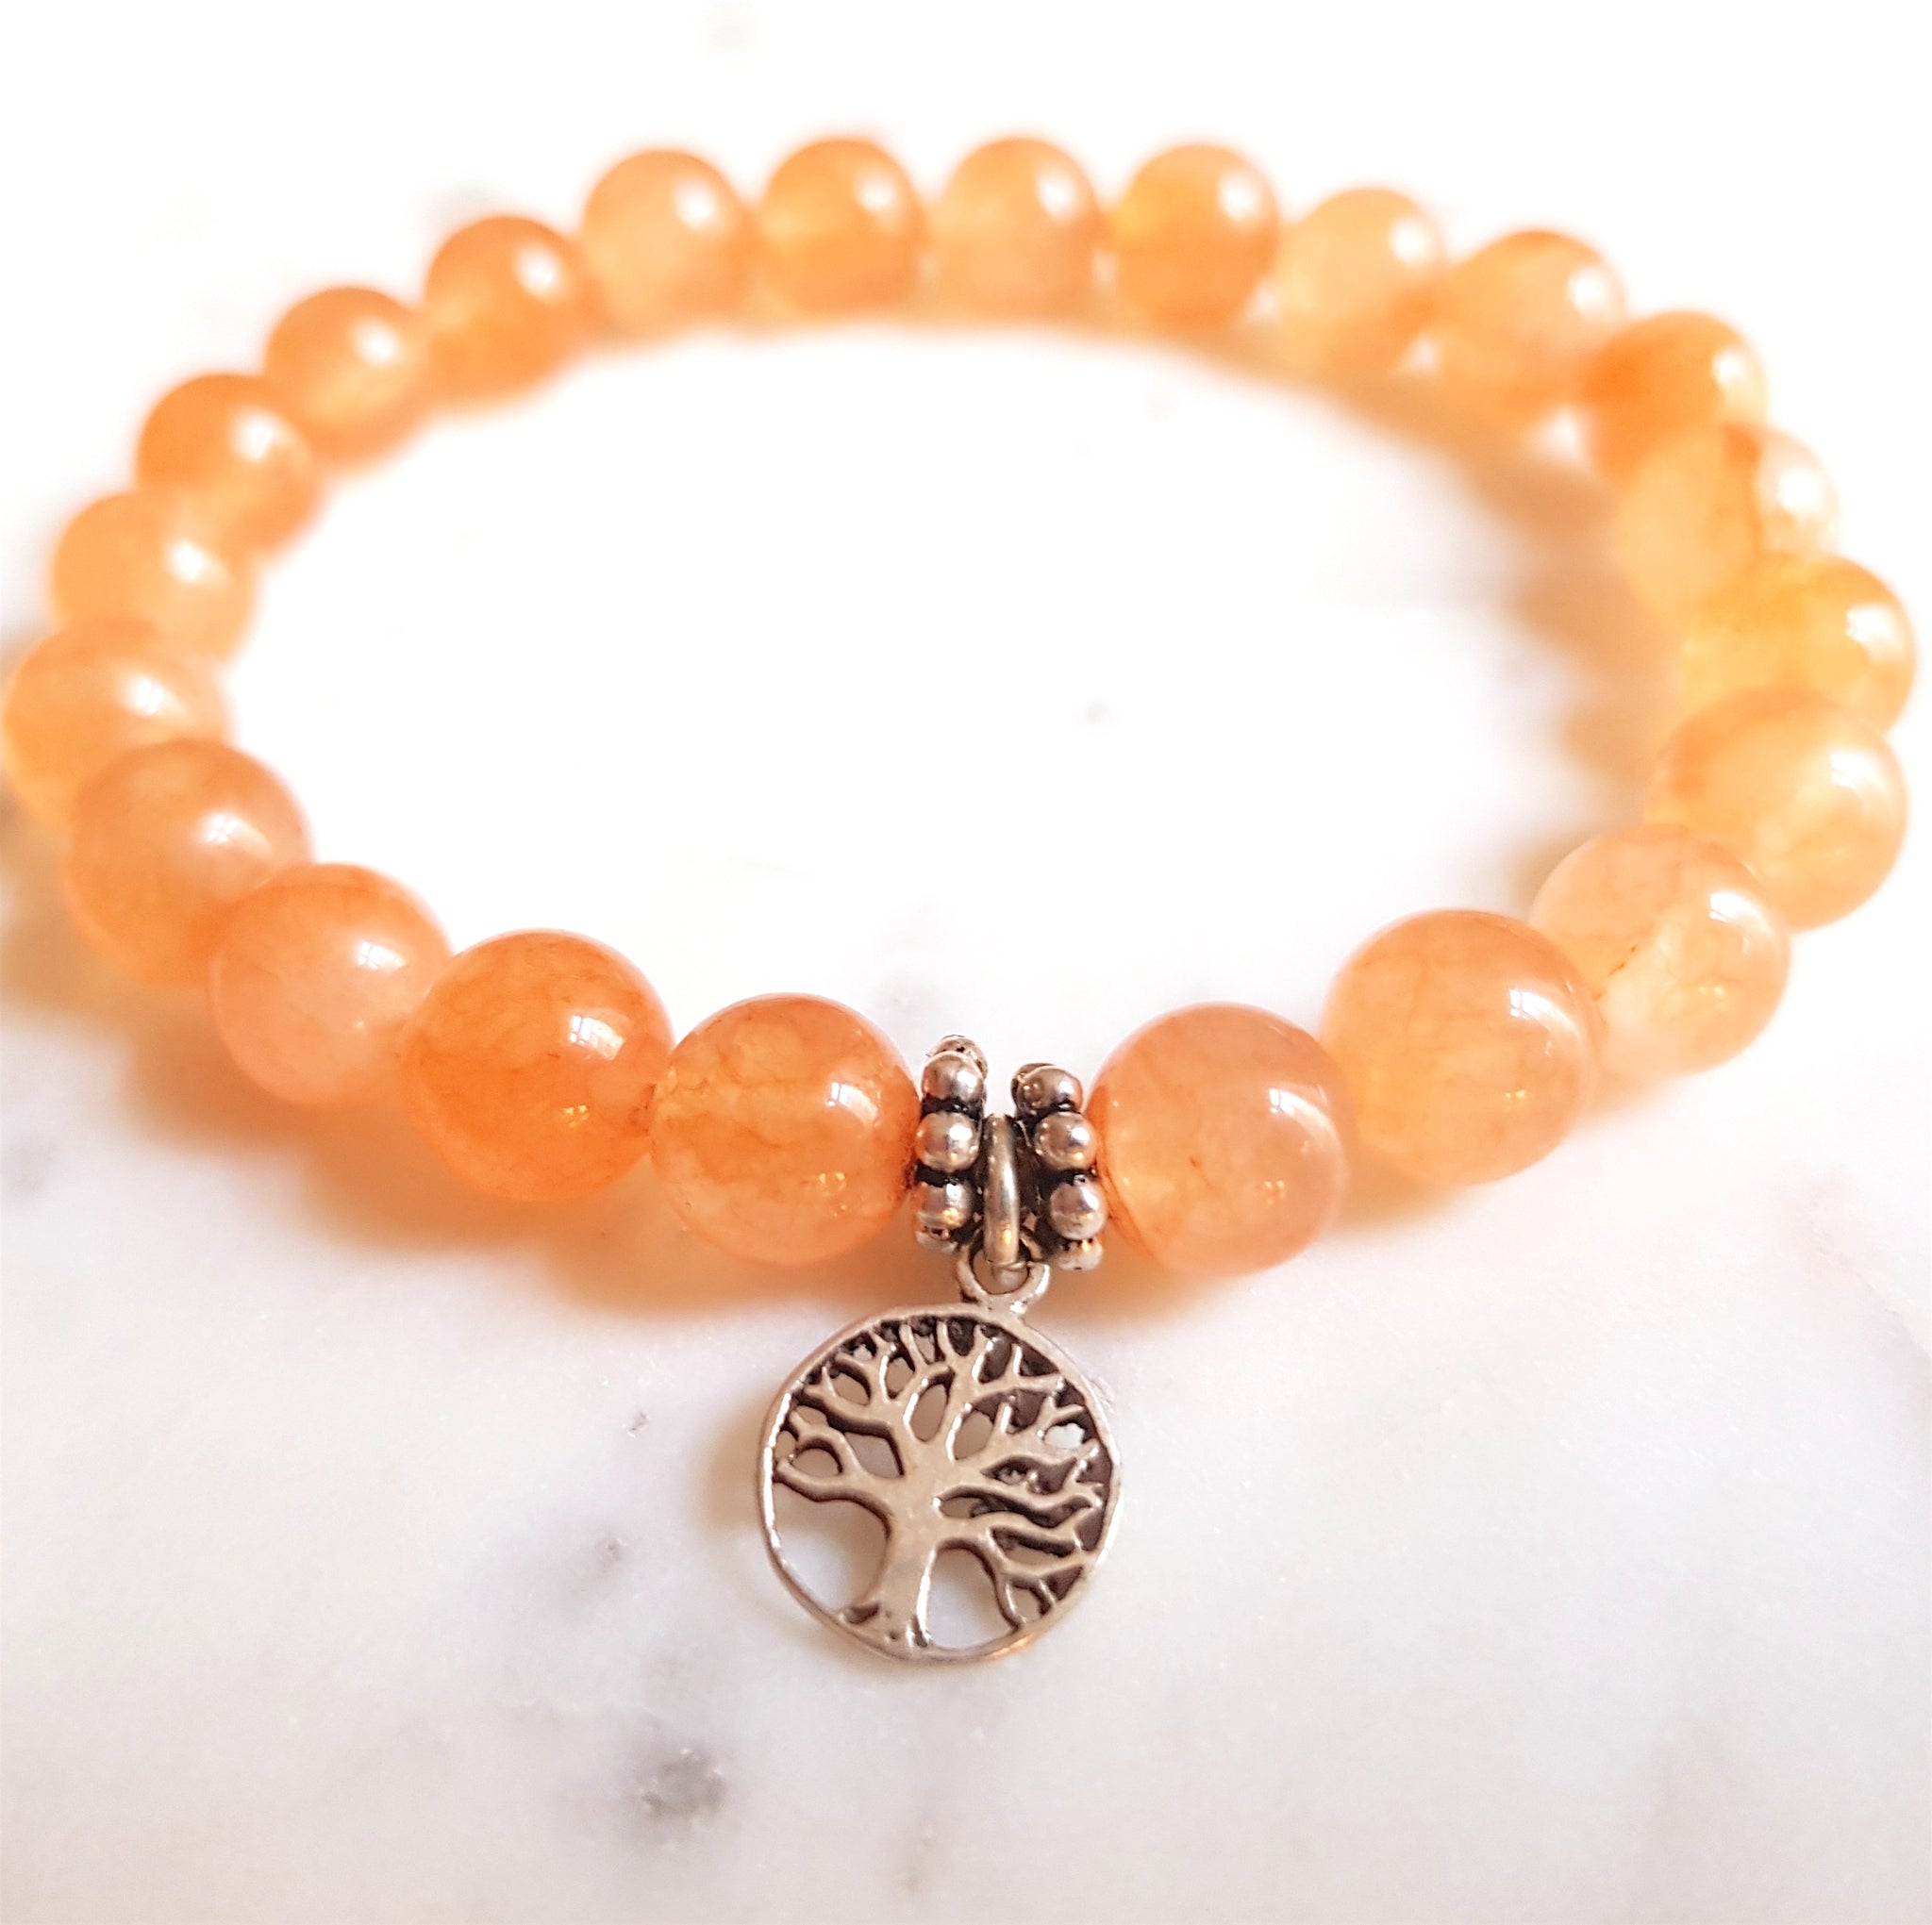 Aria Mala Atelier's unique one-of-a-kind salmon jade yoga bracelet with sterling silver Tree of life charm for spiritual living